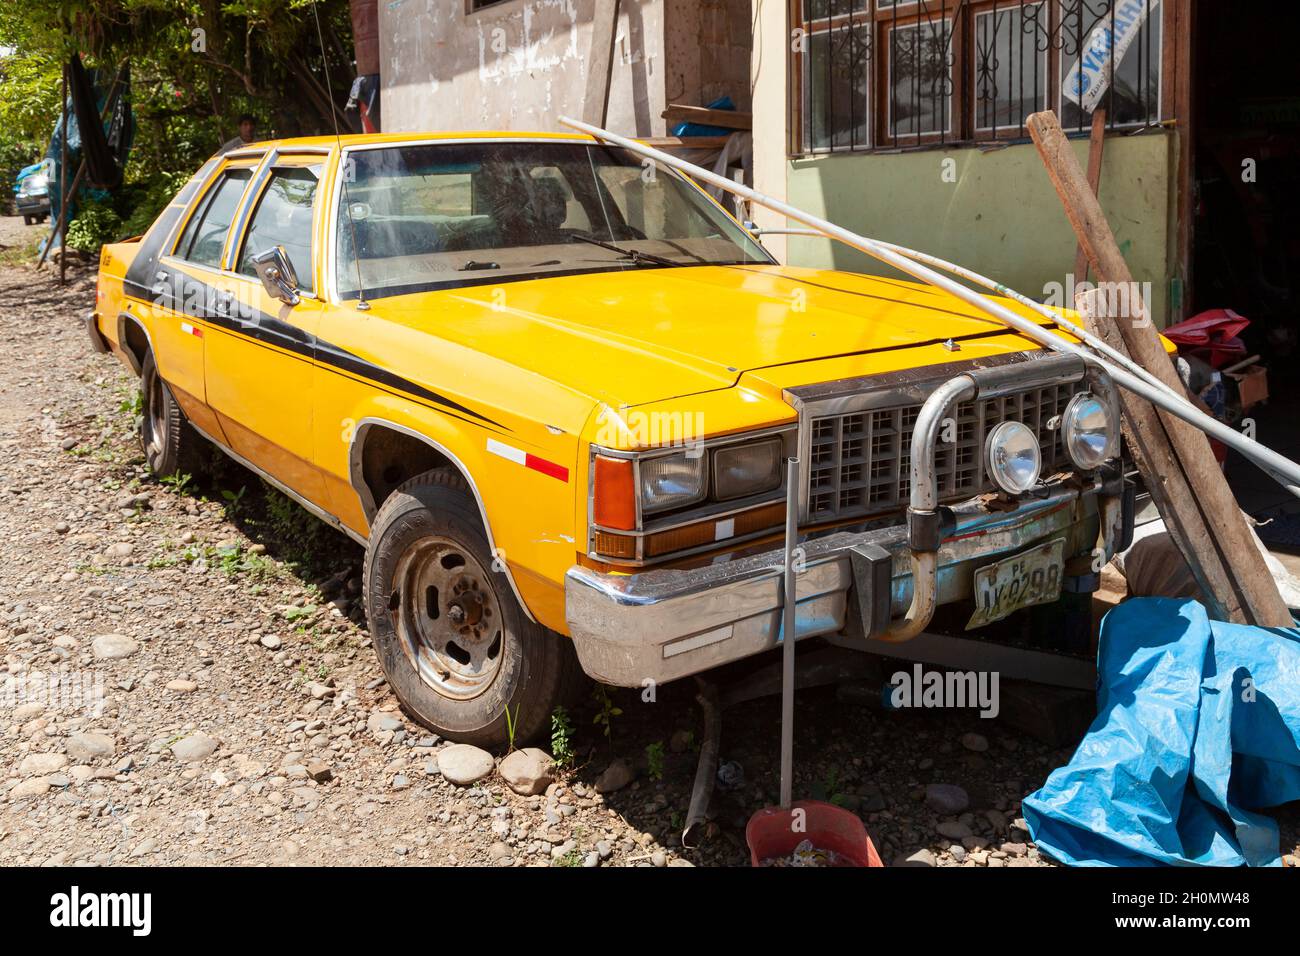 Pilcopata, Peru - April 10, 2014: An old and big yellow car, rests parked in the surroundings of the small town of Pilcopata Stock Photo